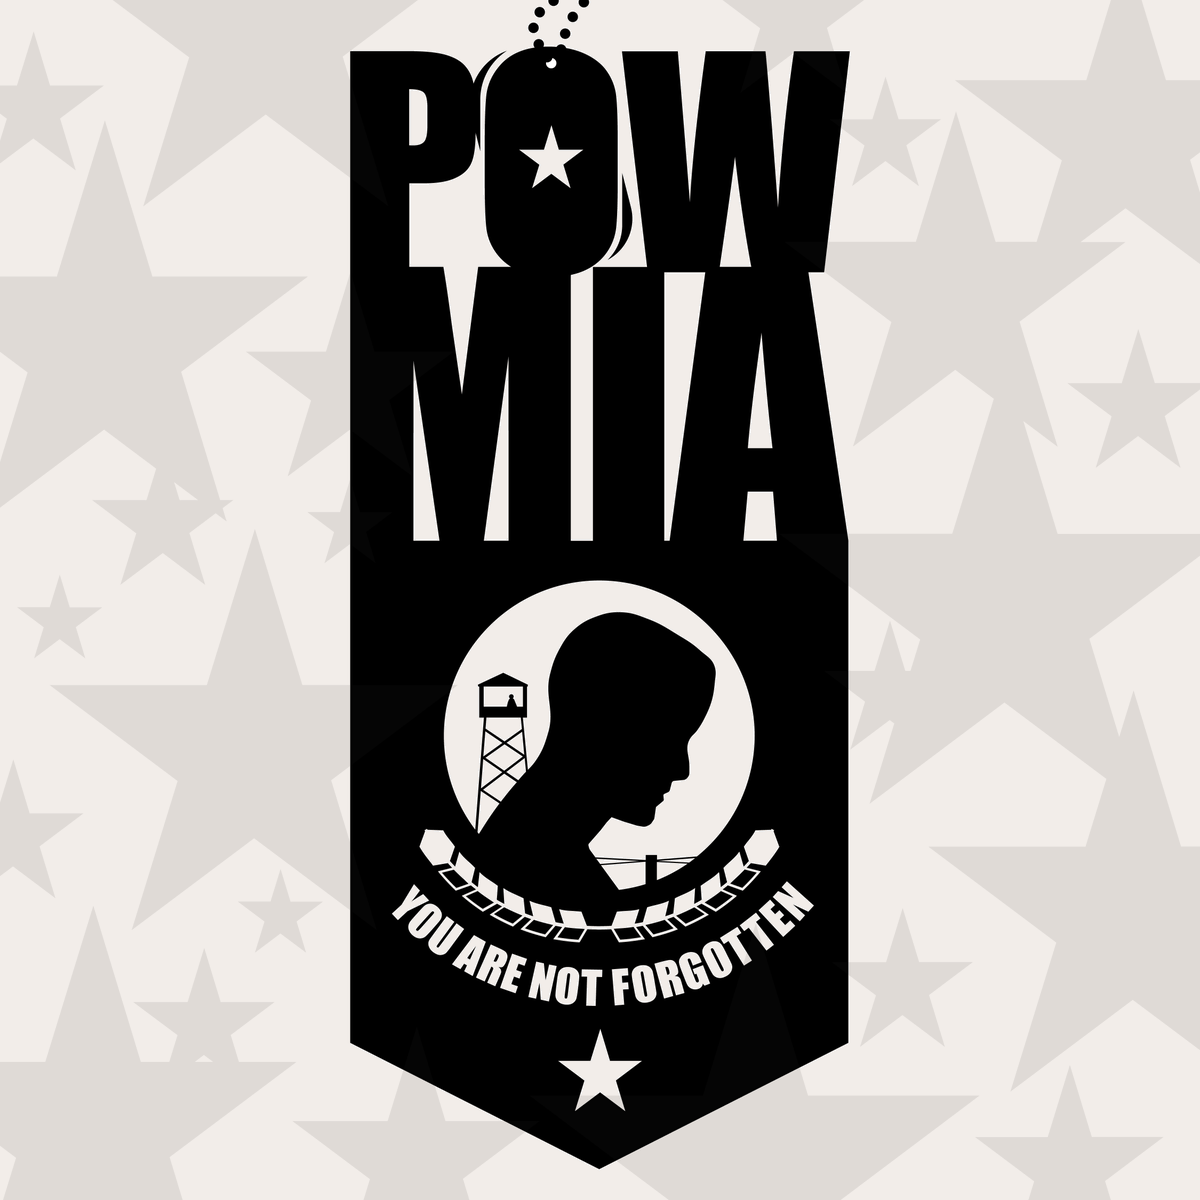 POWs went above and beyond during their call of duty, with 50,000 Americans captured as they fought for us. Today, on #NationalFormerPOWRecognitionDay, we recognize their sacrifice. Thank you for your service, bravery, and determination. 🇺🇸